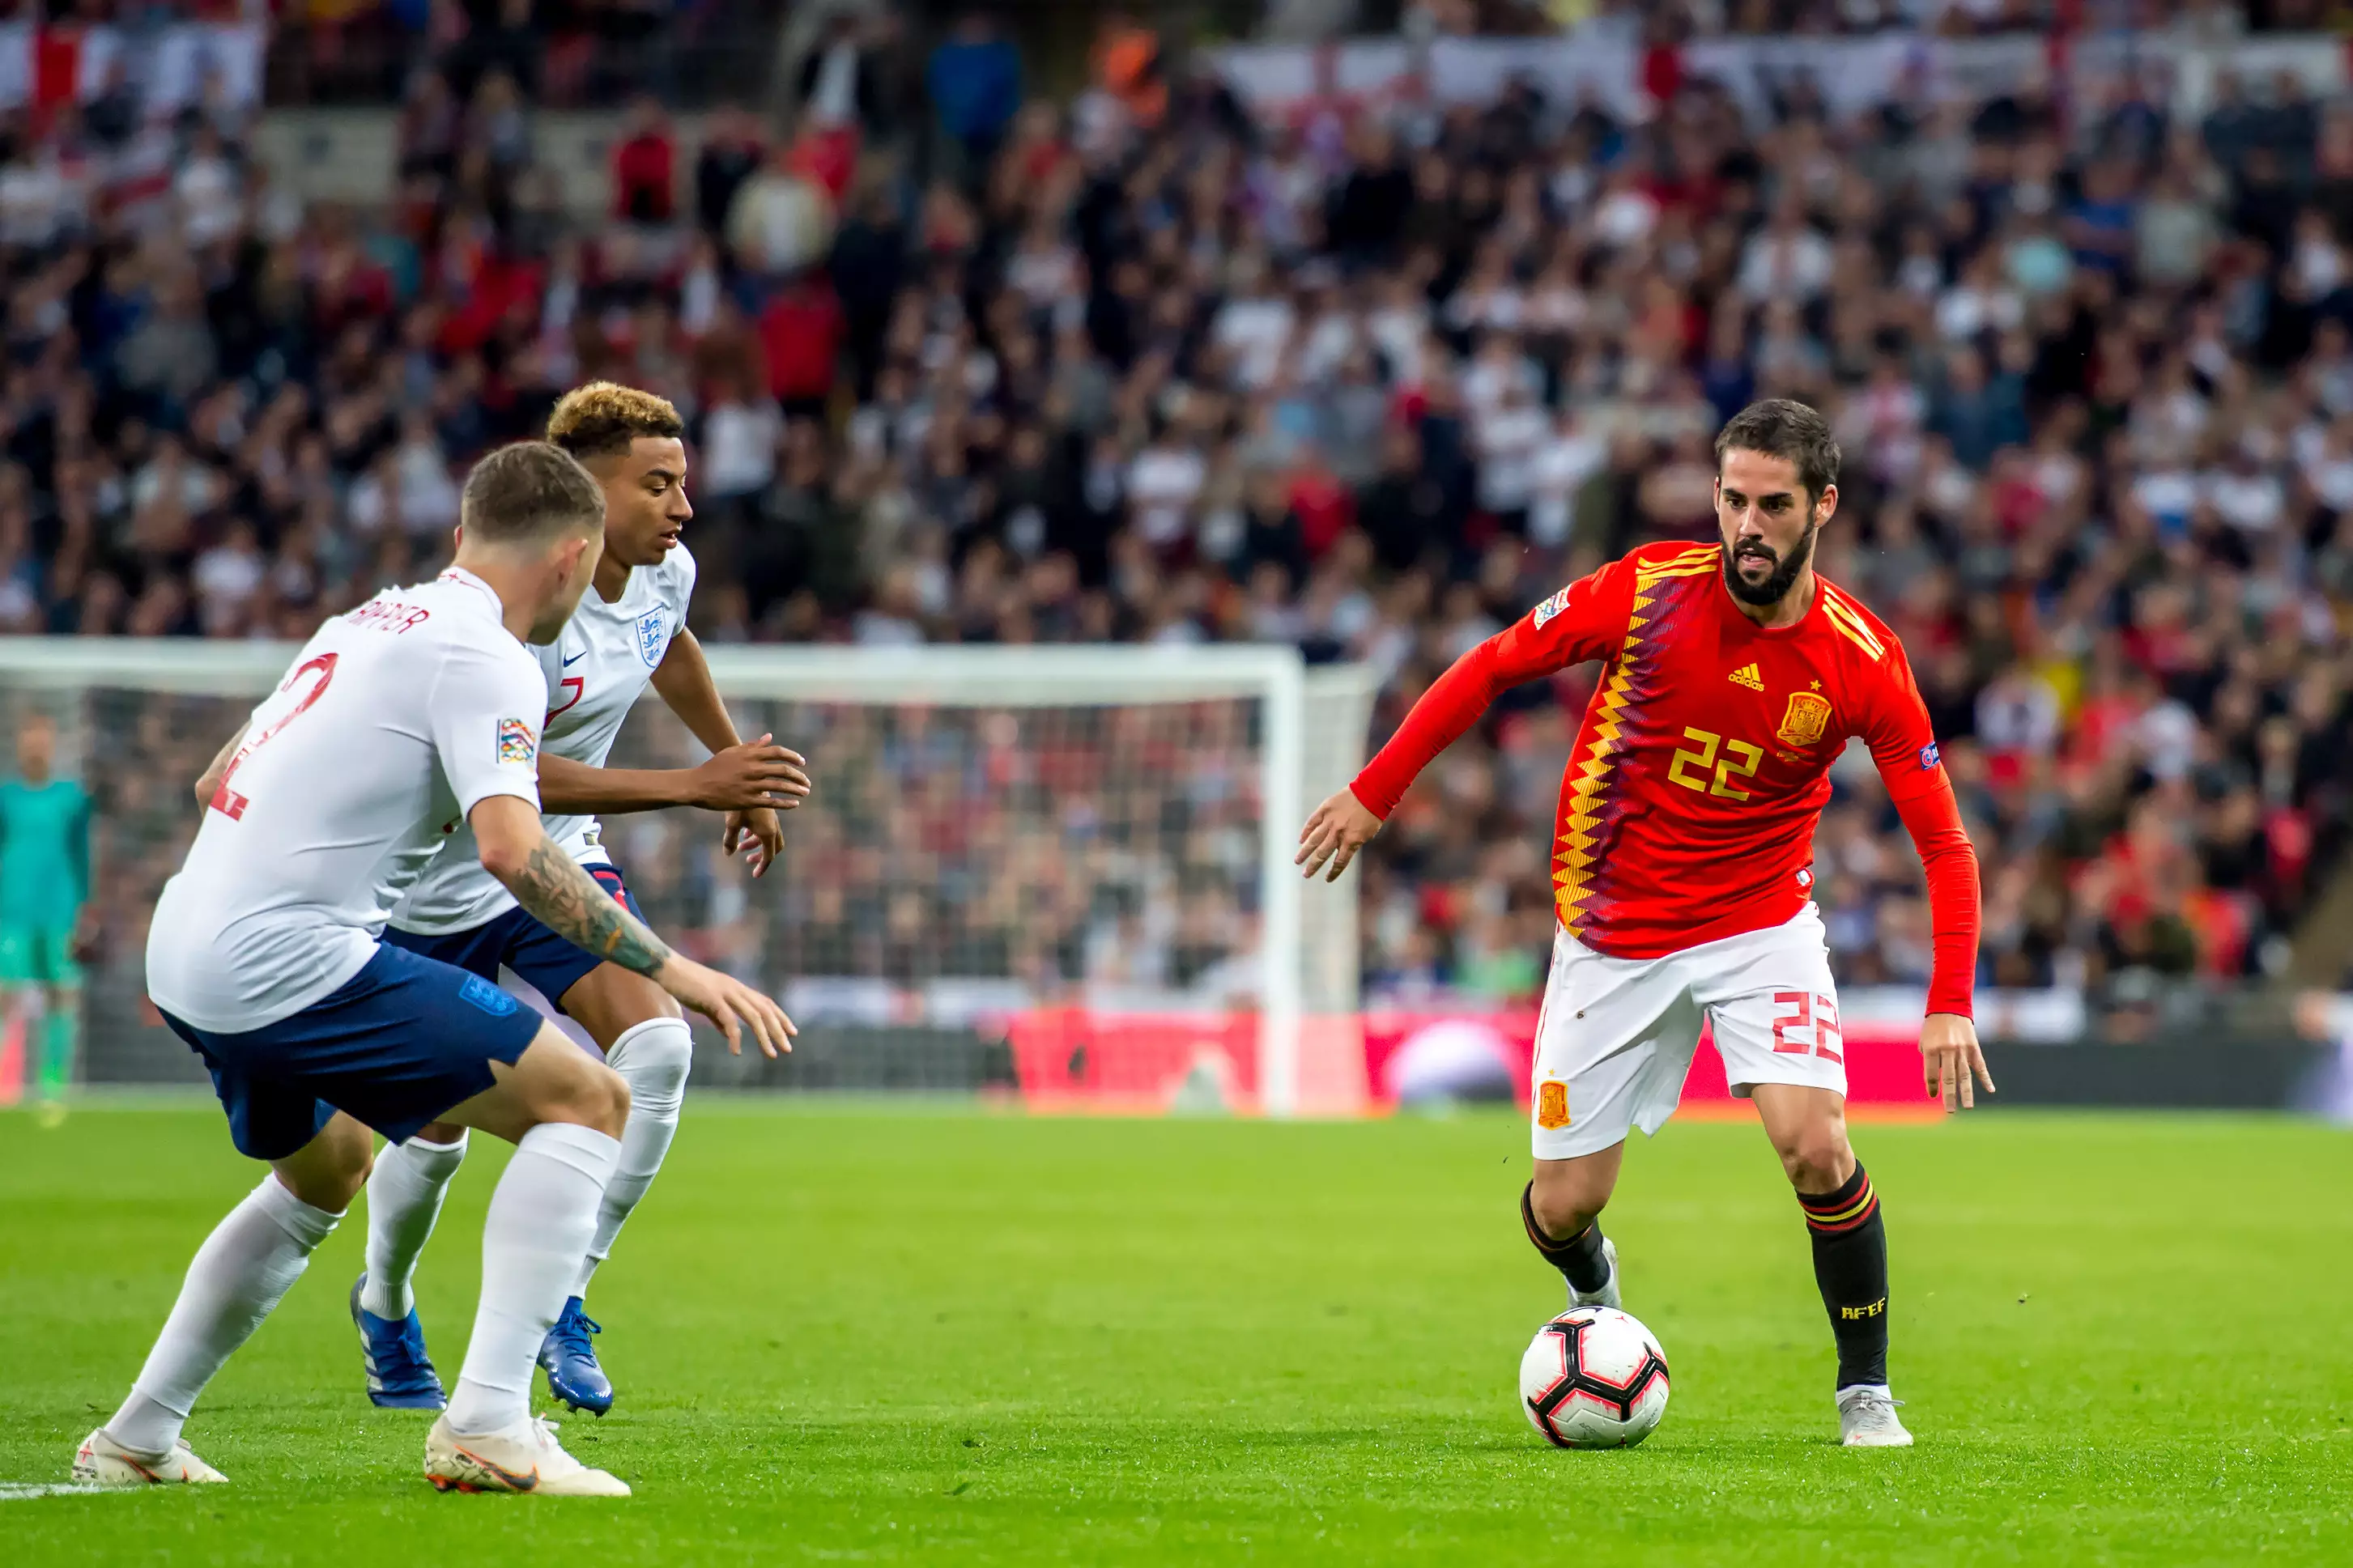 Isco against England at the recent international. Image: PA Images